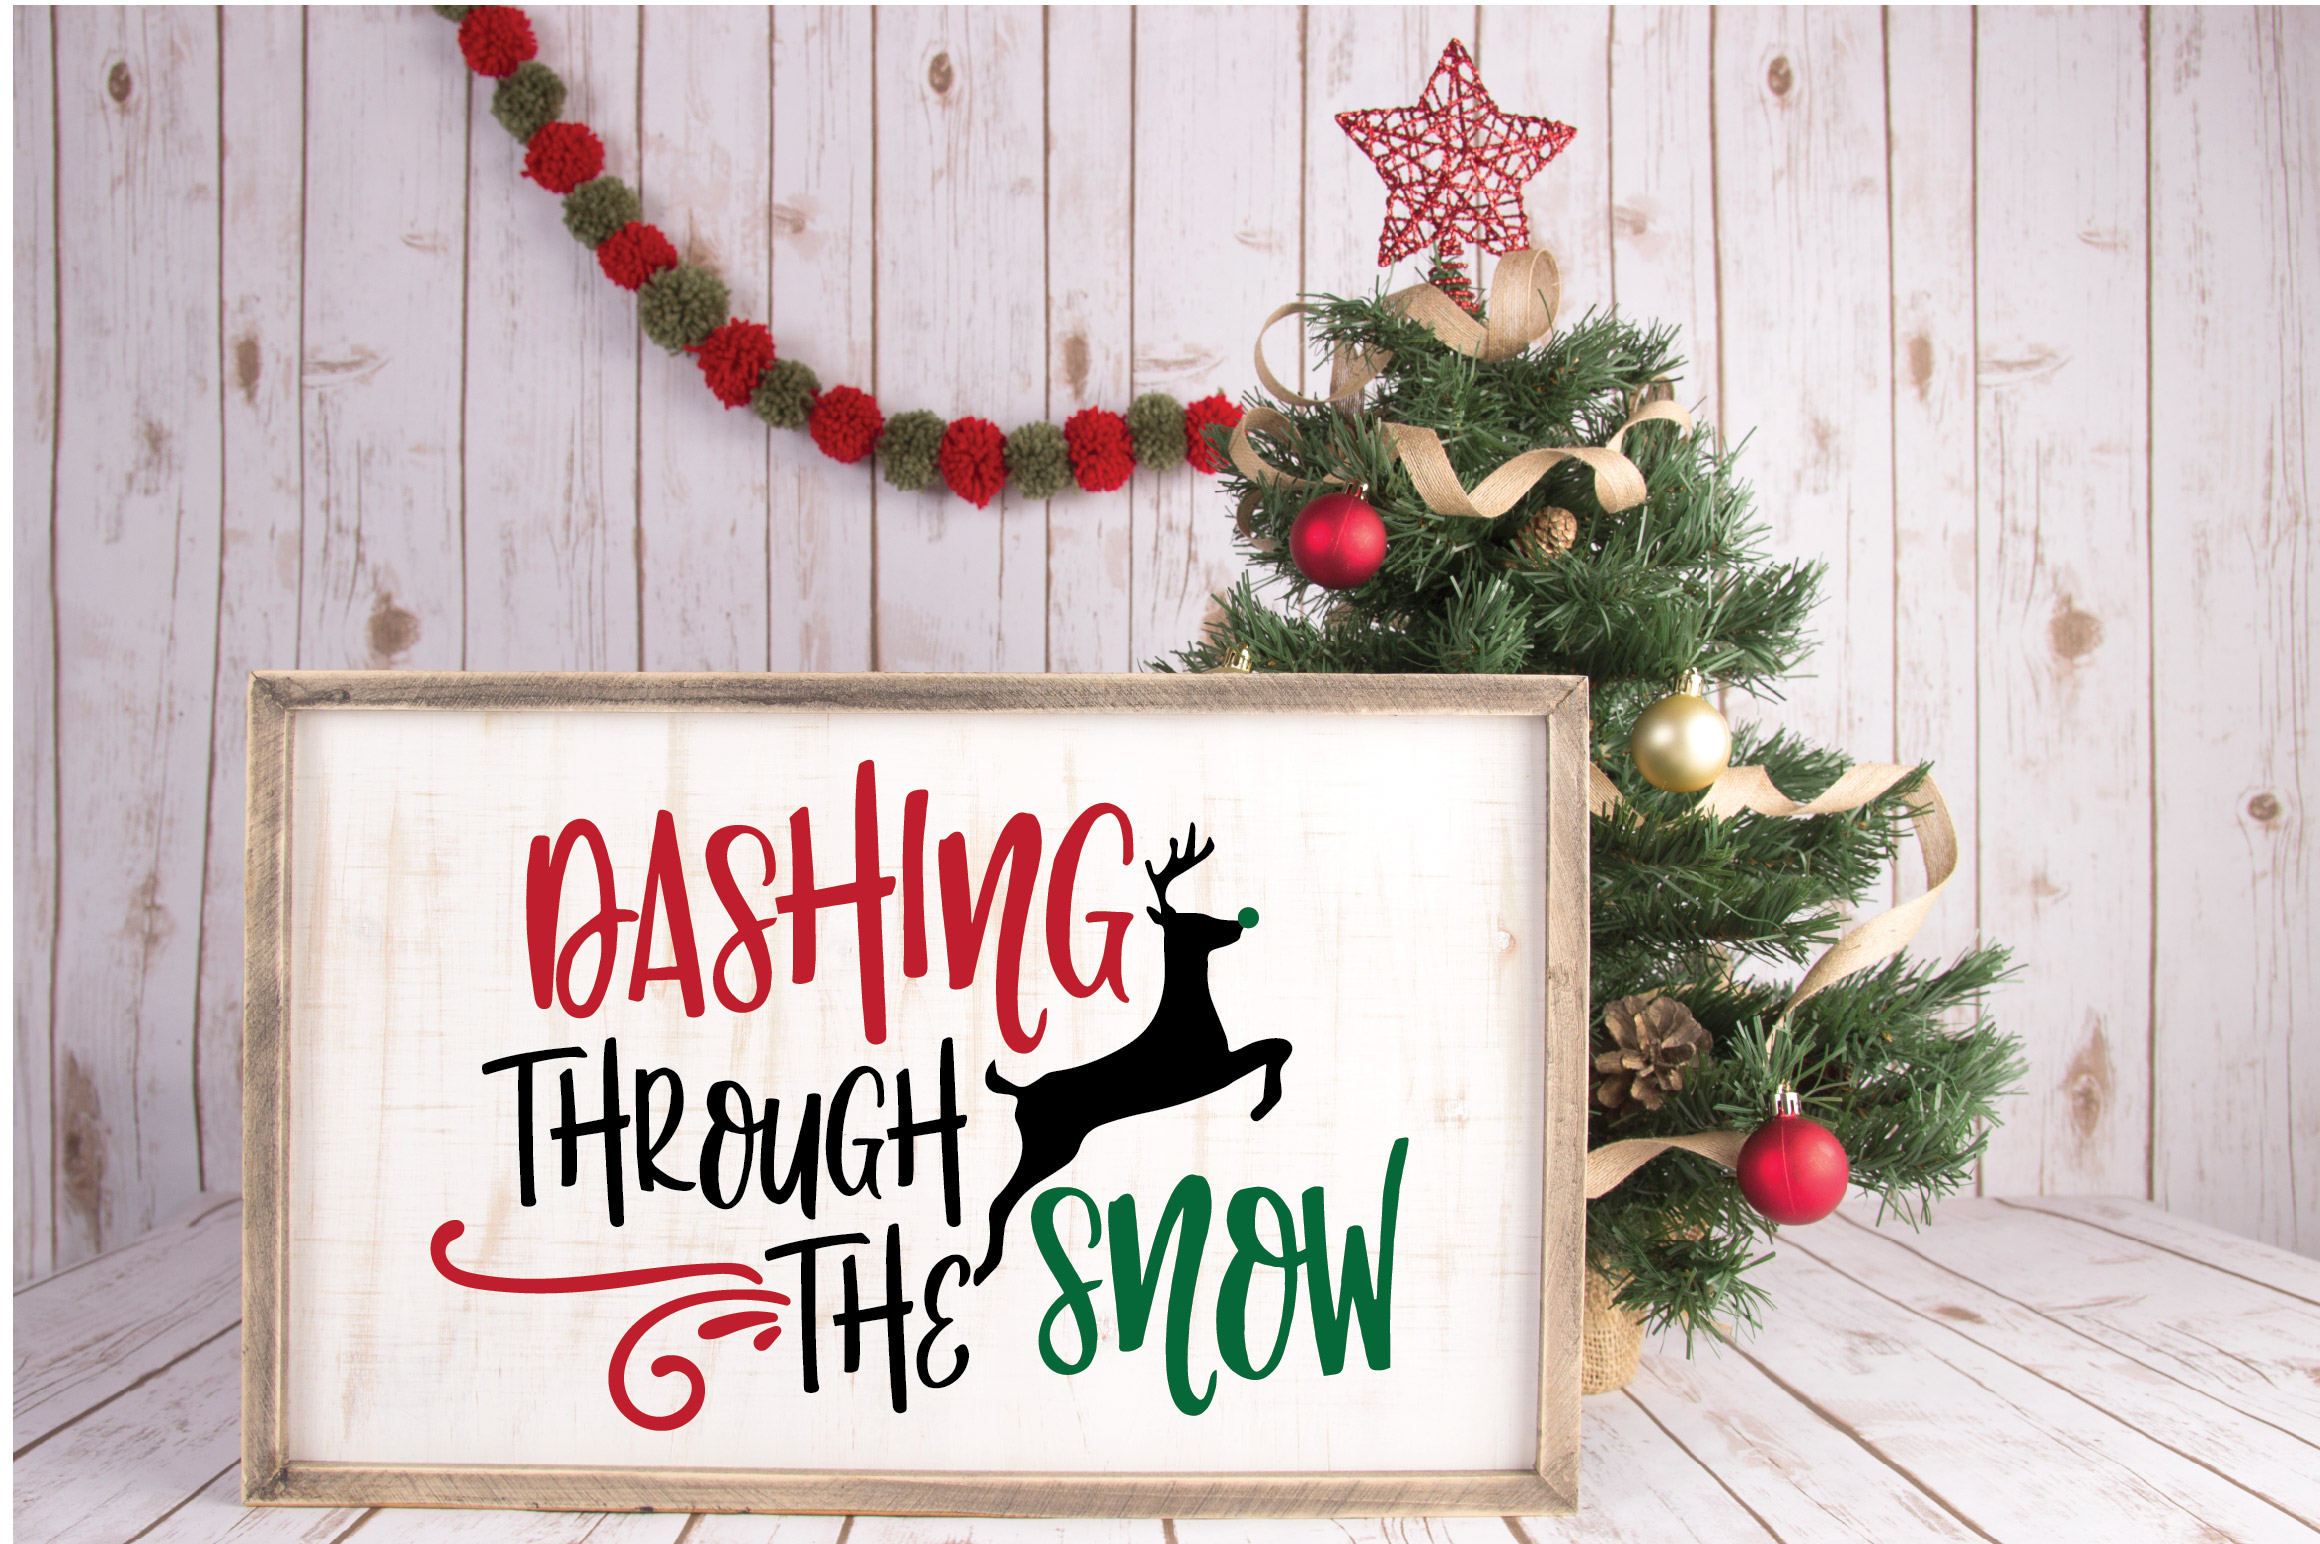 Download Dashing Through the Snow SVG Cut File - Christmas SVG DXF ...